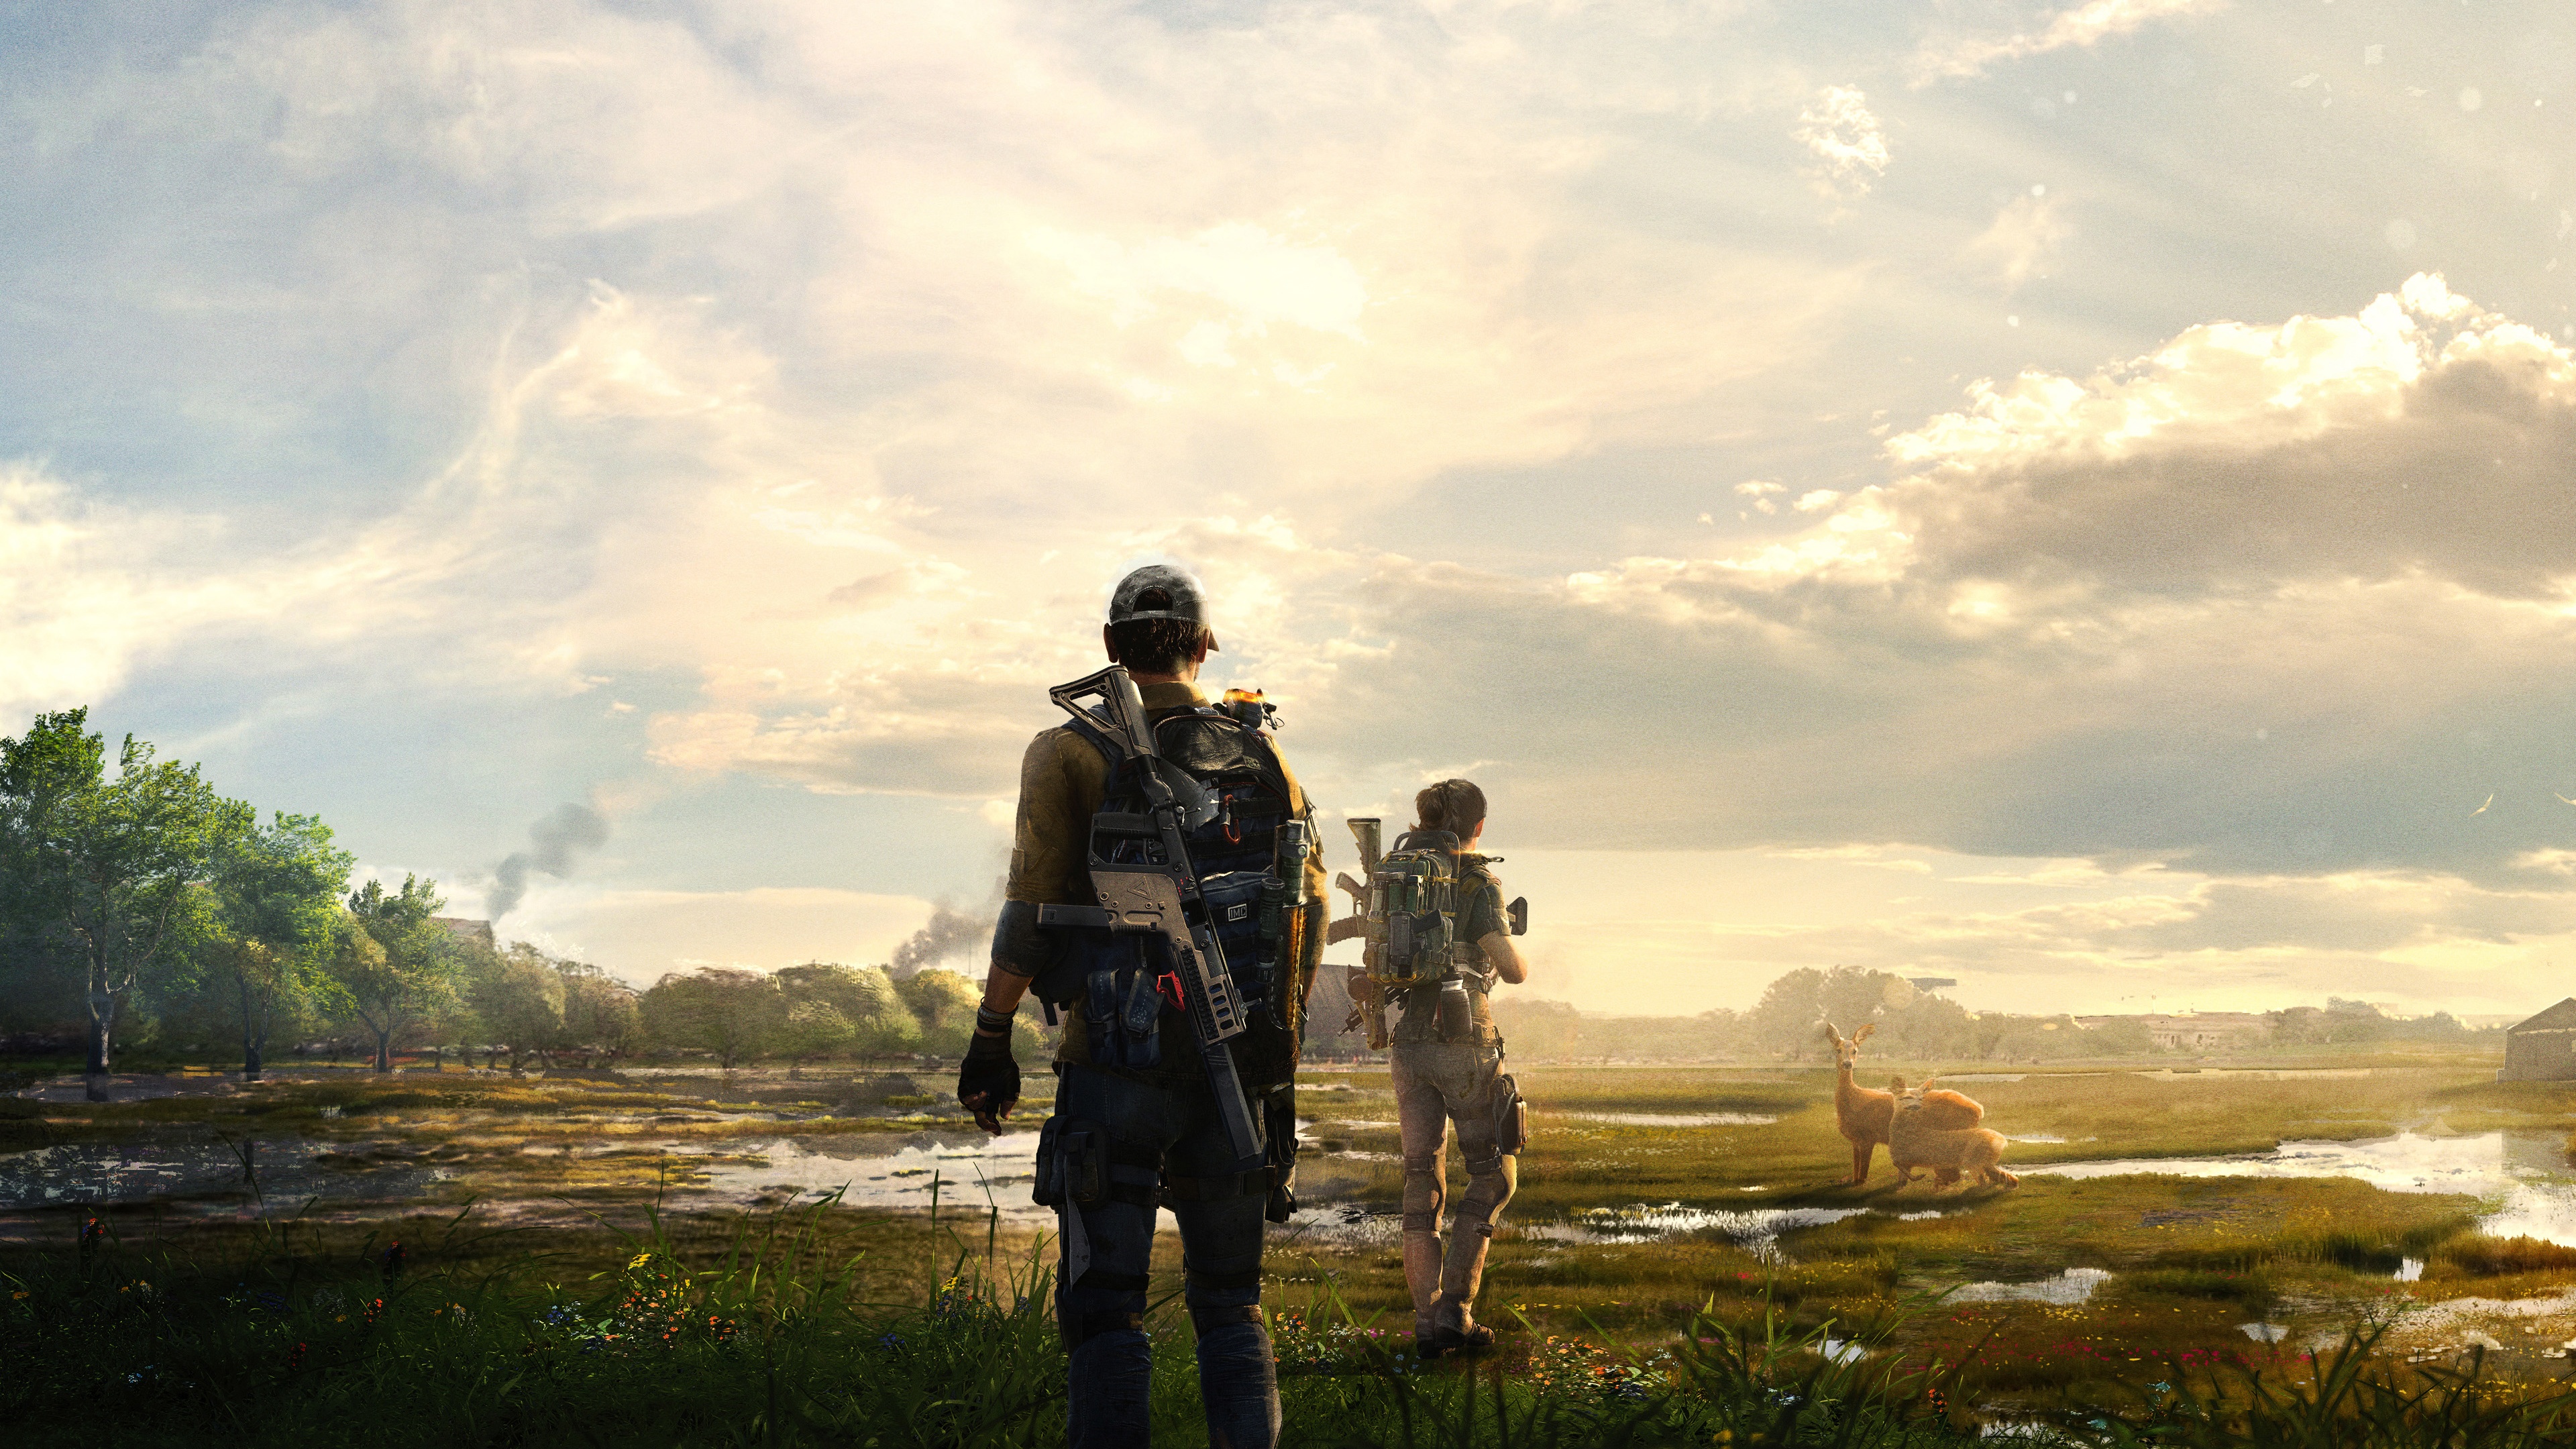 video game, tom clancy's the division 2